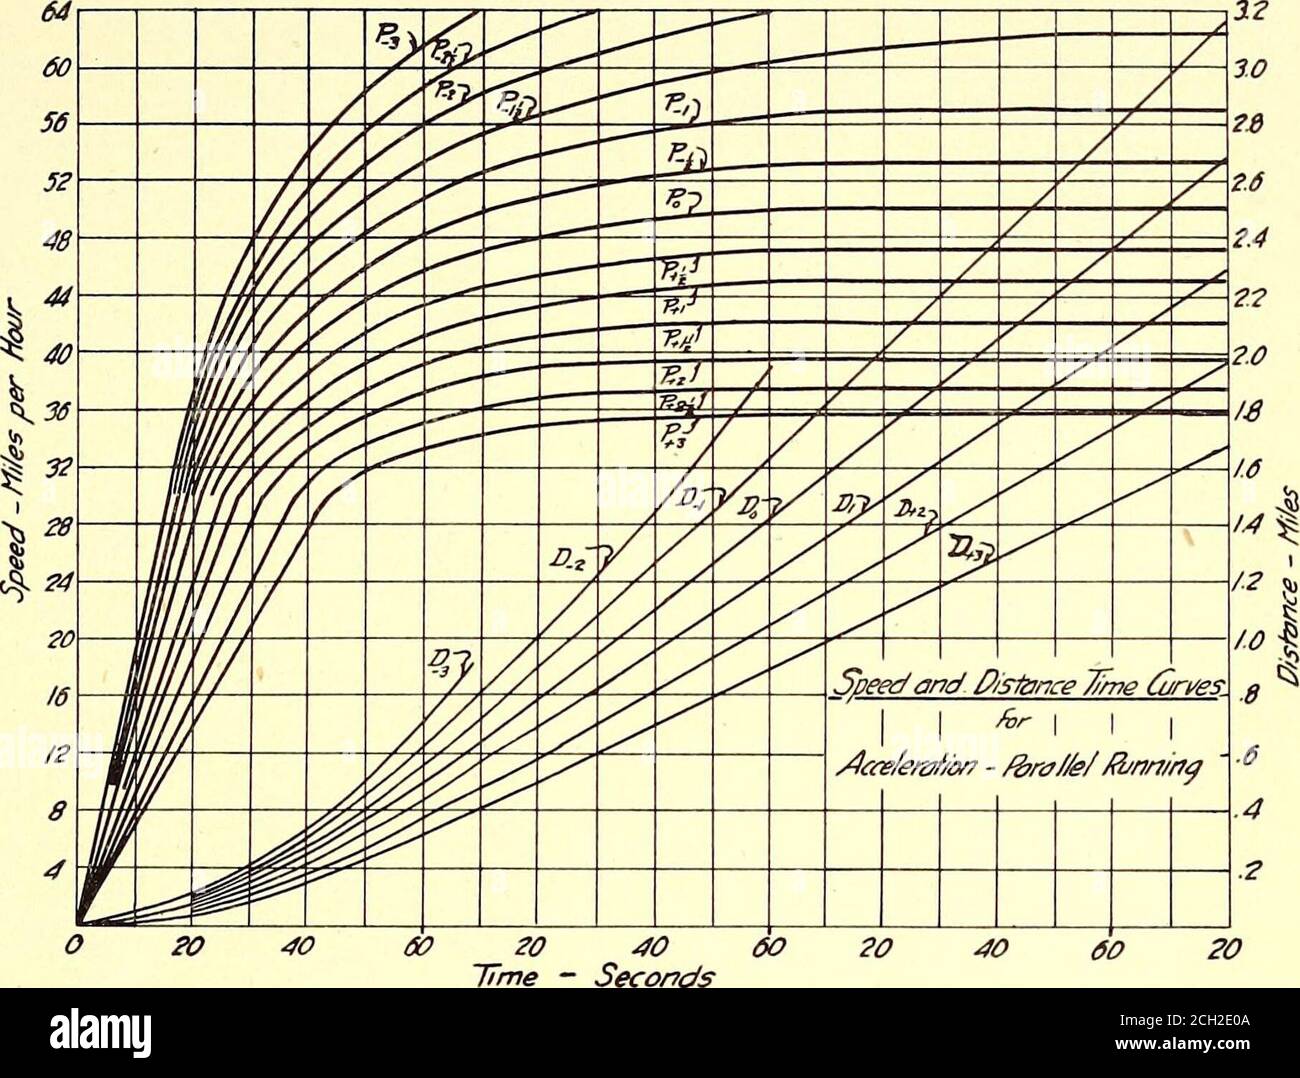 . The Street railway journal . he mean accelerating efifort in pounds per motor during the speed interval V.W = the total dead weight of the train in pounds divided by the number of motors on the train.W i = the weight in pounds per motor that is equivalent in effect to the added resistance to acceleration due to the inertia of the rotating parts.This is usually equal to about 3 to 8 per cent of W.This formula can be set on the sliderule so as to read directly the value of tfor different values of A. V is best parts, therefore t = 22.5 seconds. This determines thefirst point of the curve (P, F Stock Photo